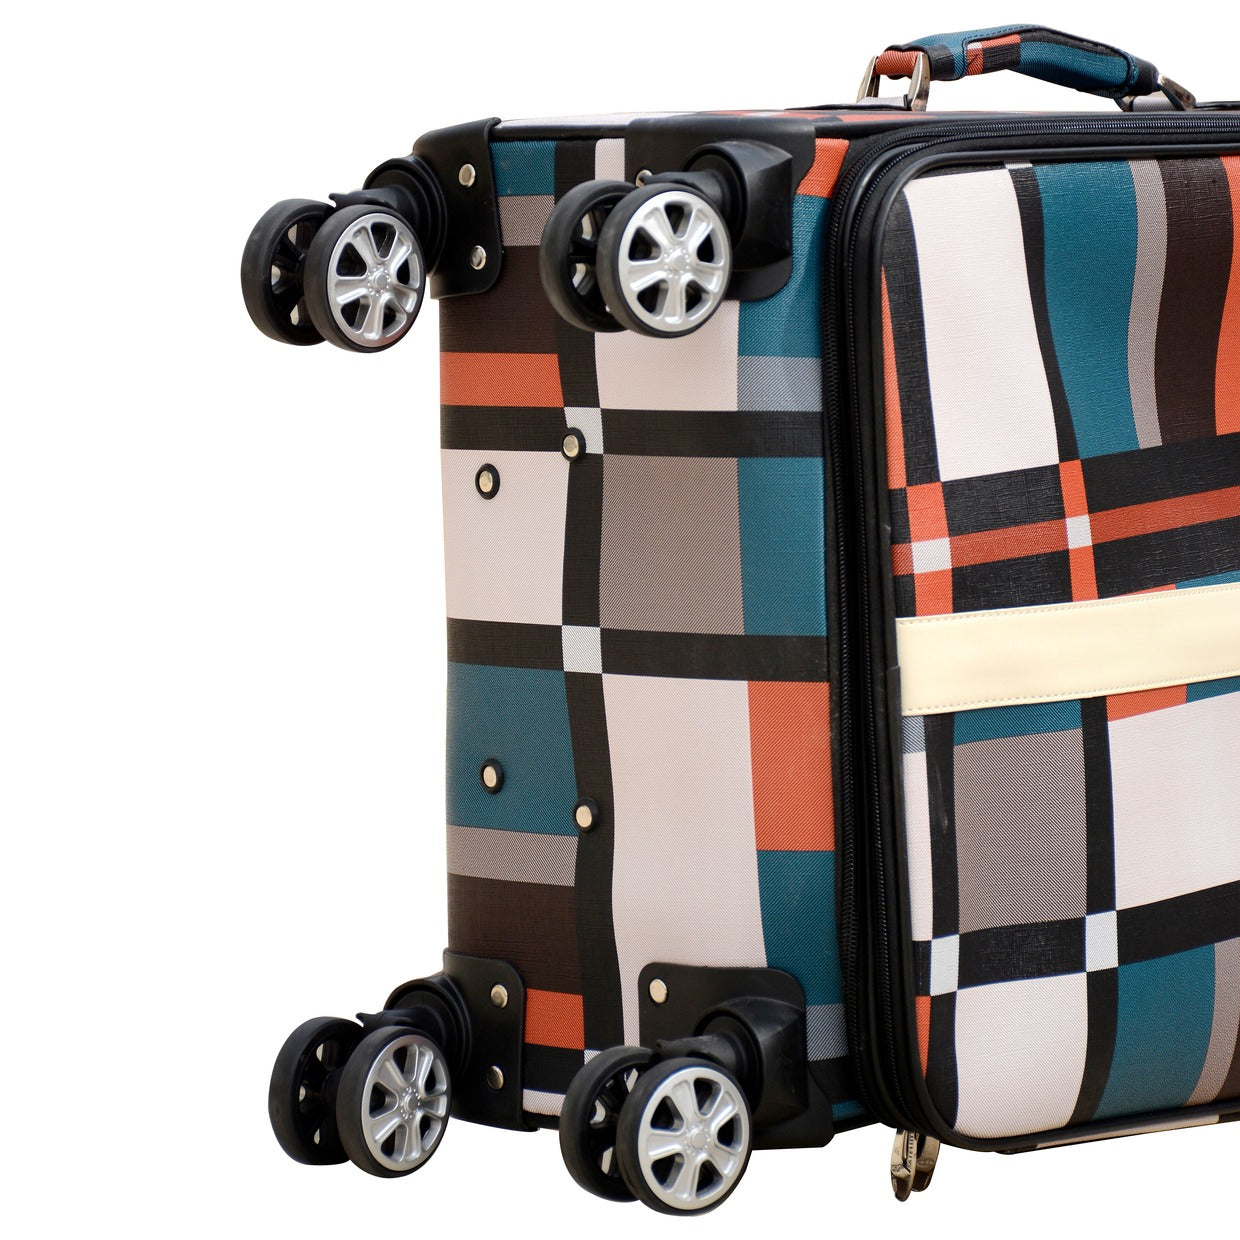 4 Piece Full Set 7" 20" 24" 28 Inches PU Check Type Luggage Lightweight Soft Material Trolley Bag with Spinner wheel